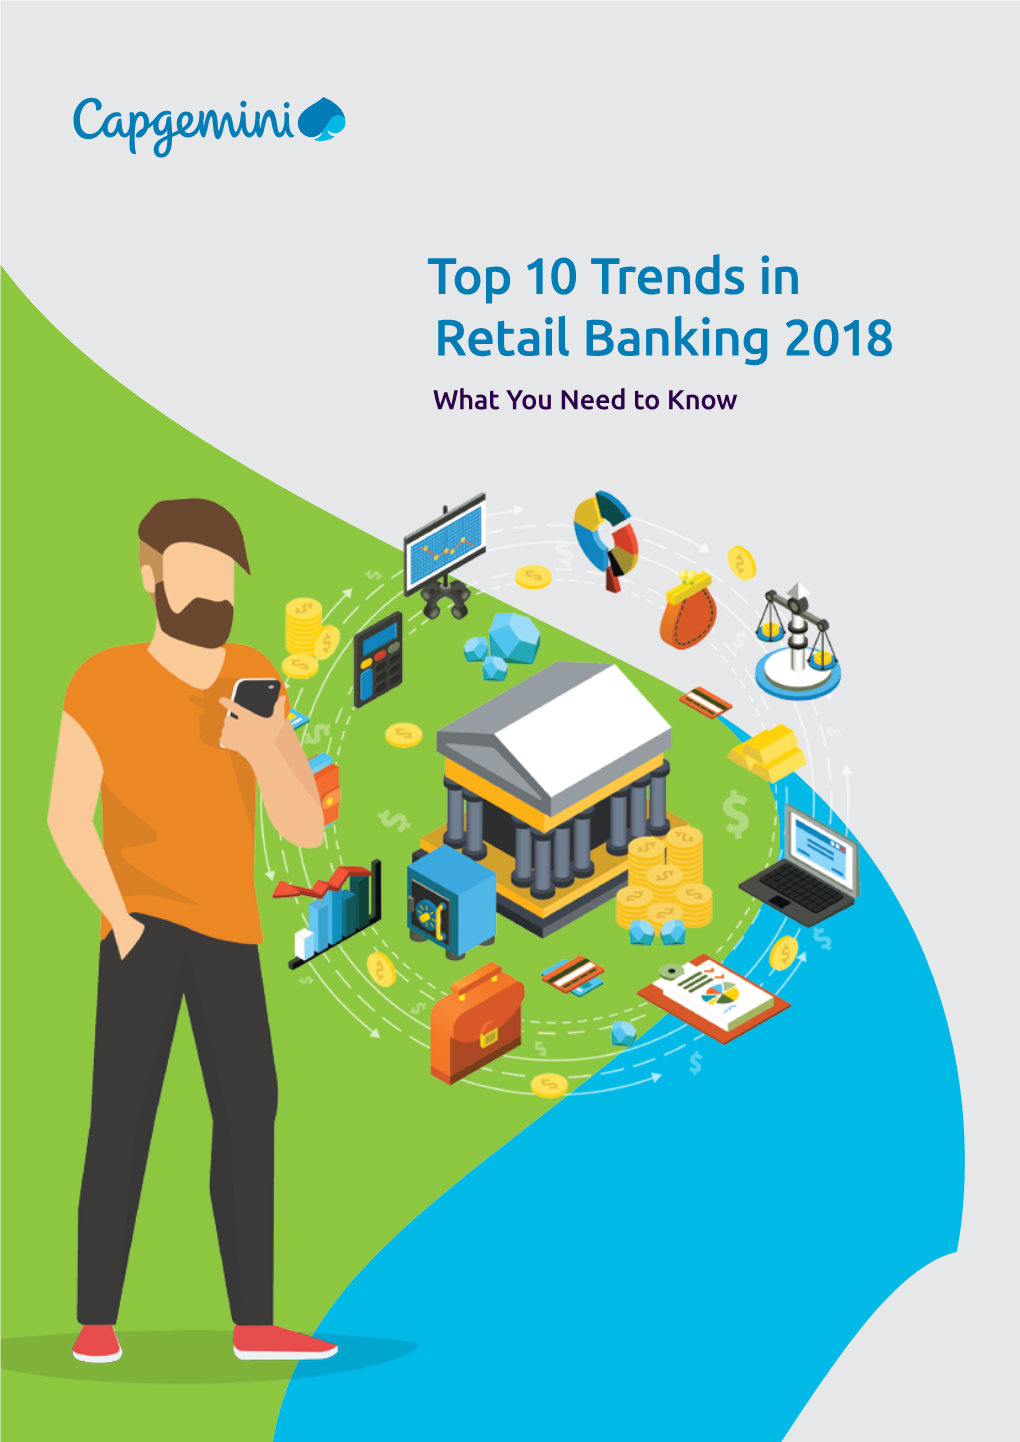 Top 10 Trends in Retail Banking 2018 What You Need to Know Contents